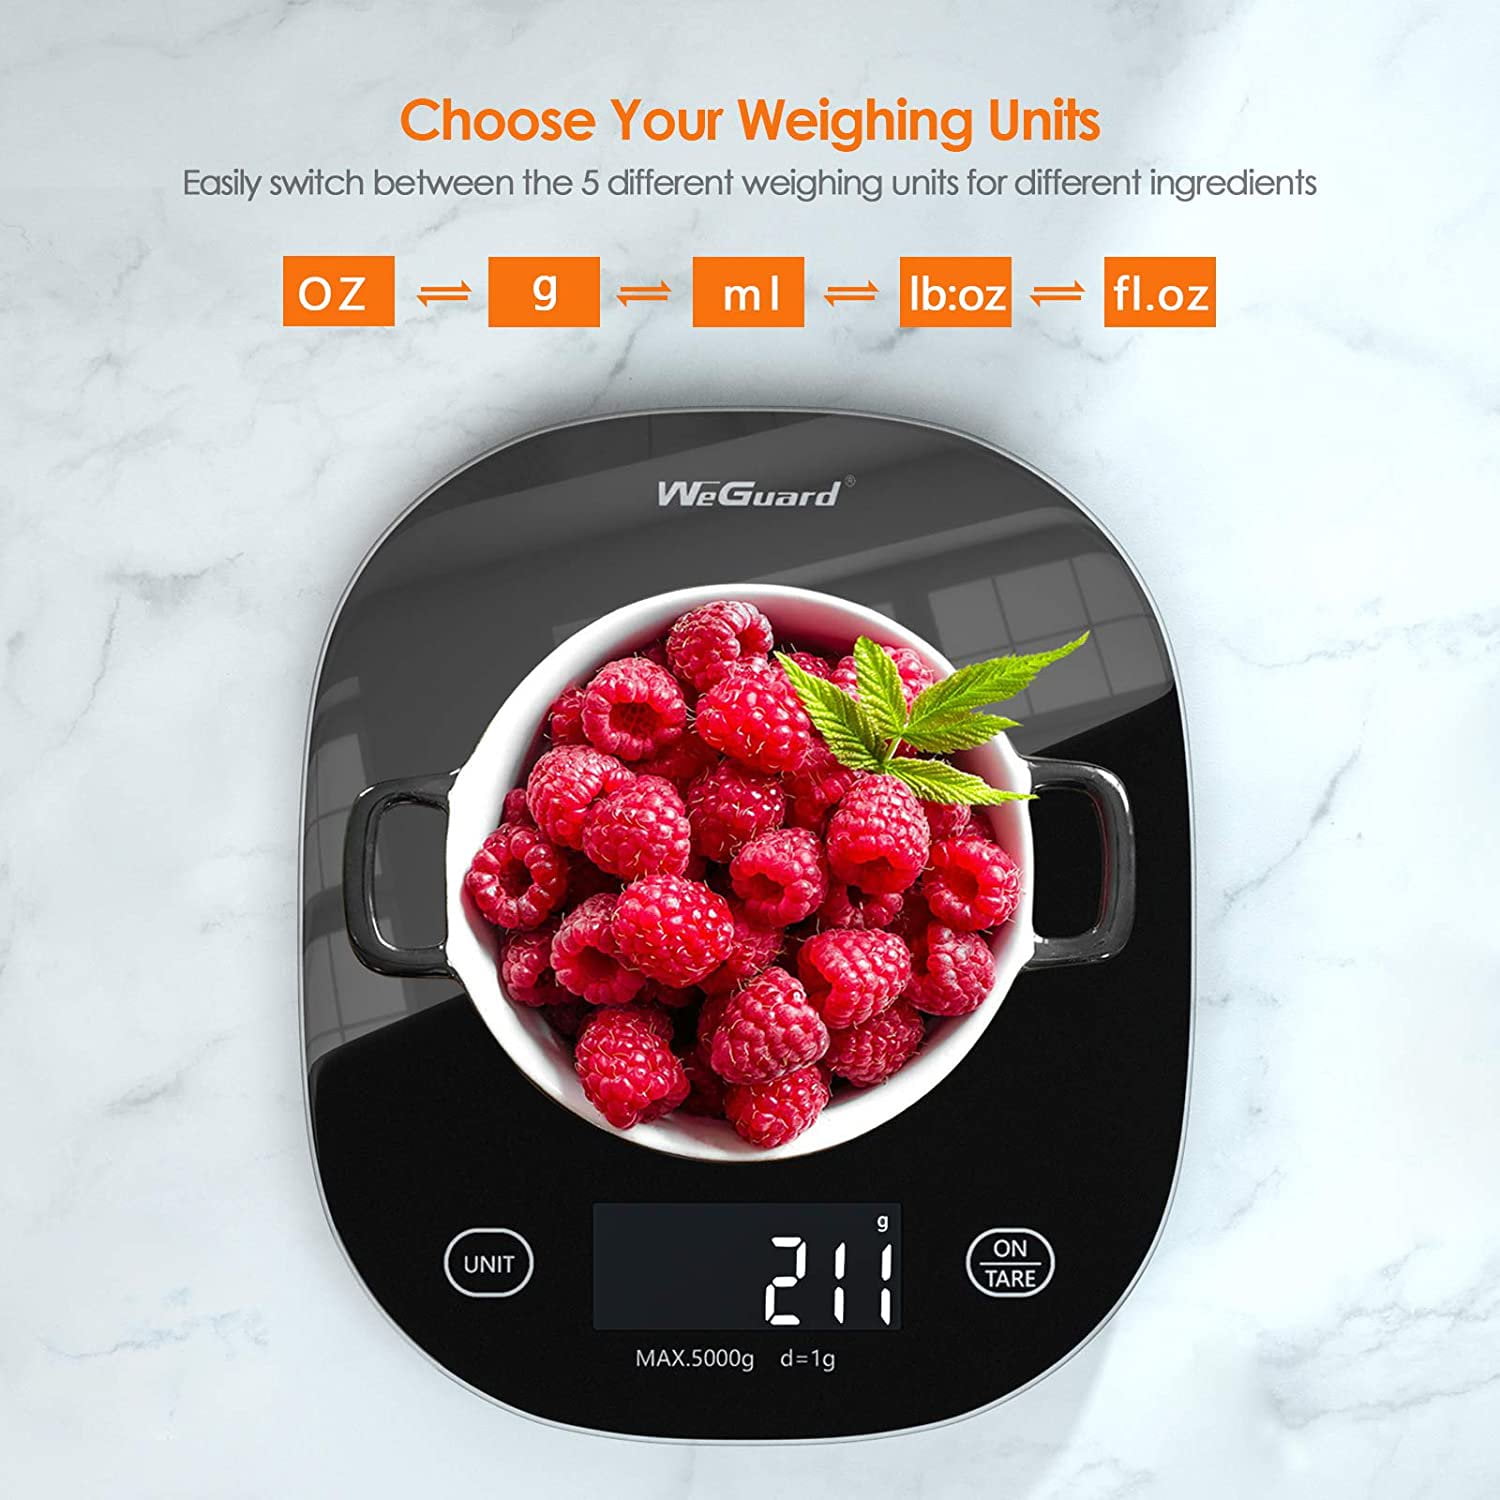 5+ Reasons a Kitchen Scale is Worth It » baking for beginners